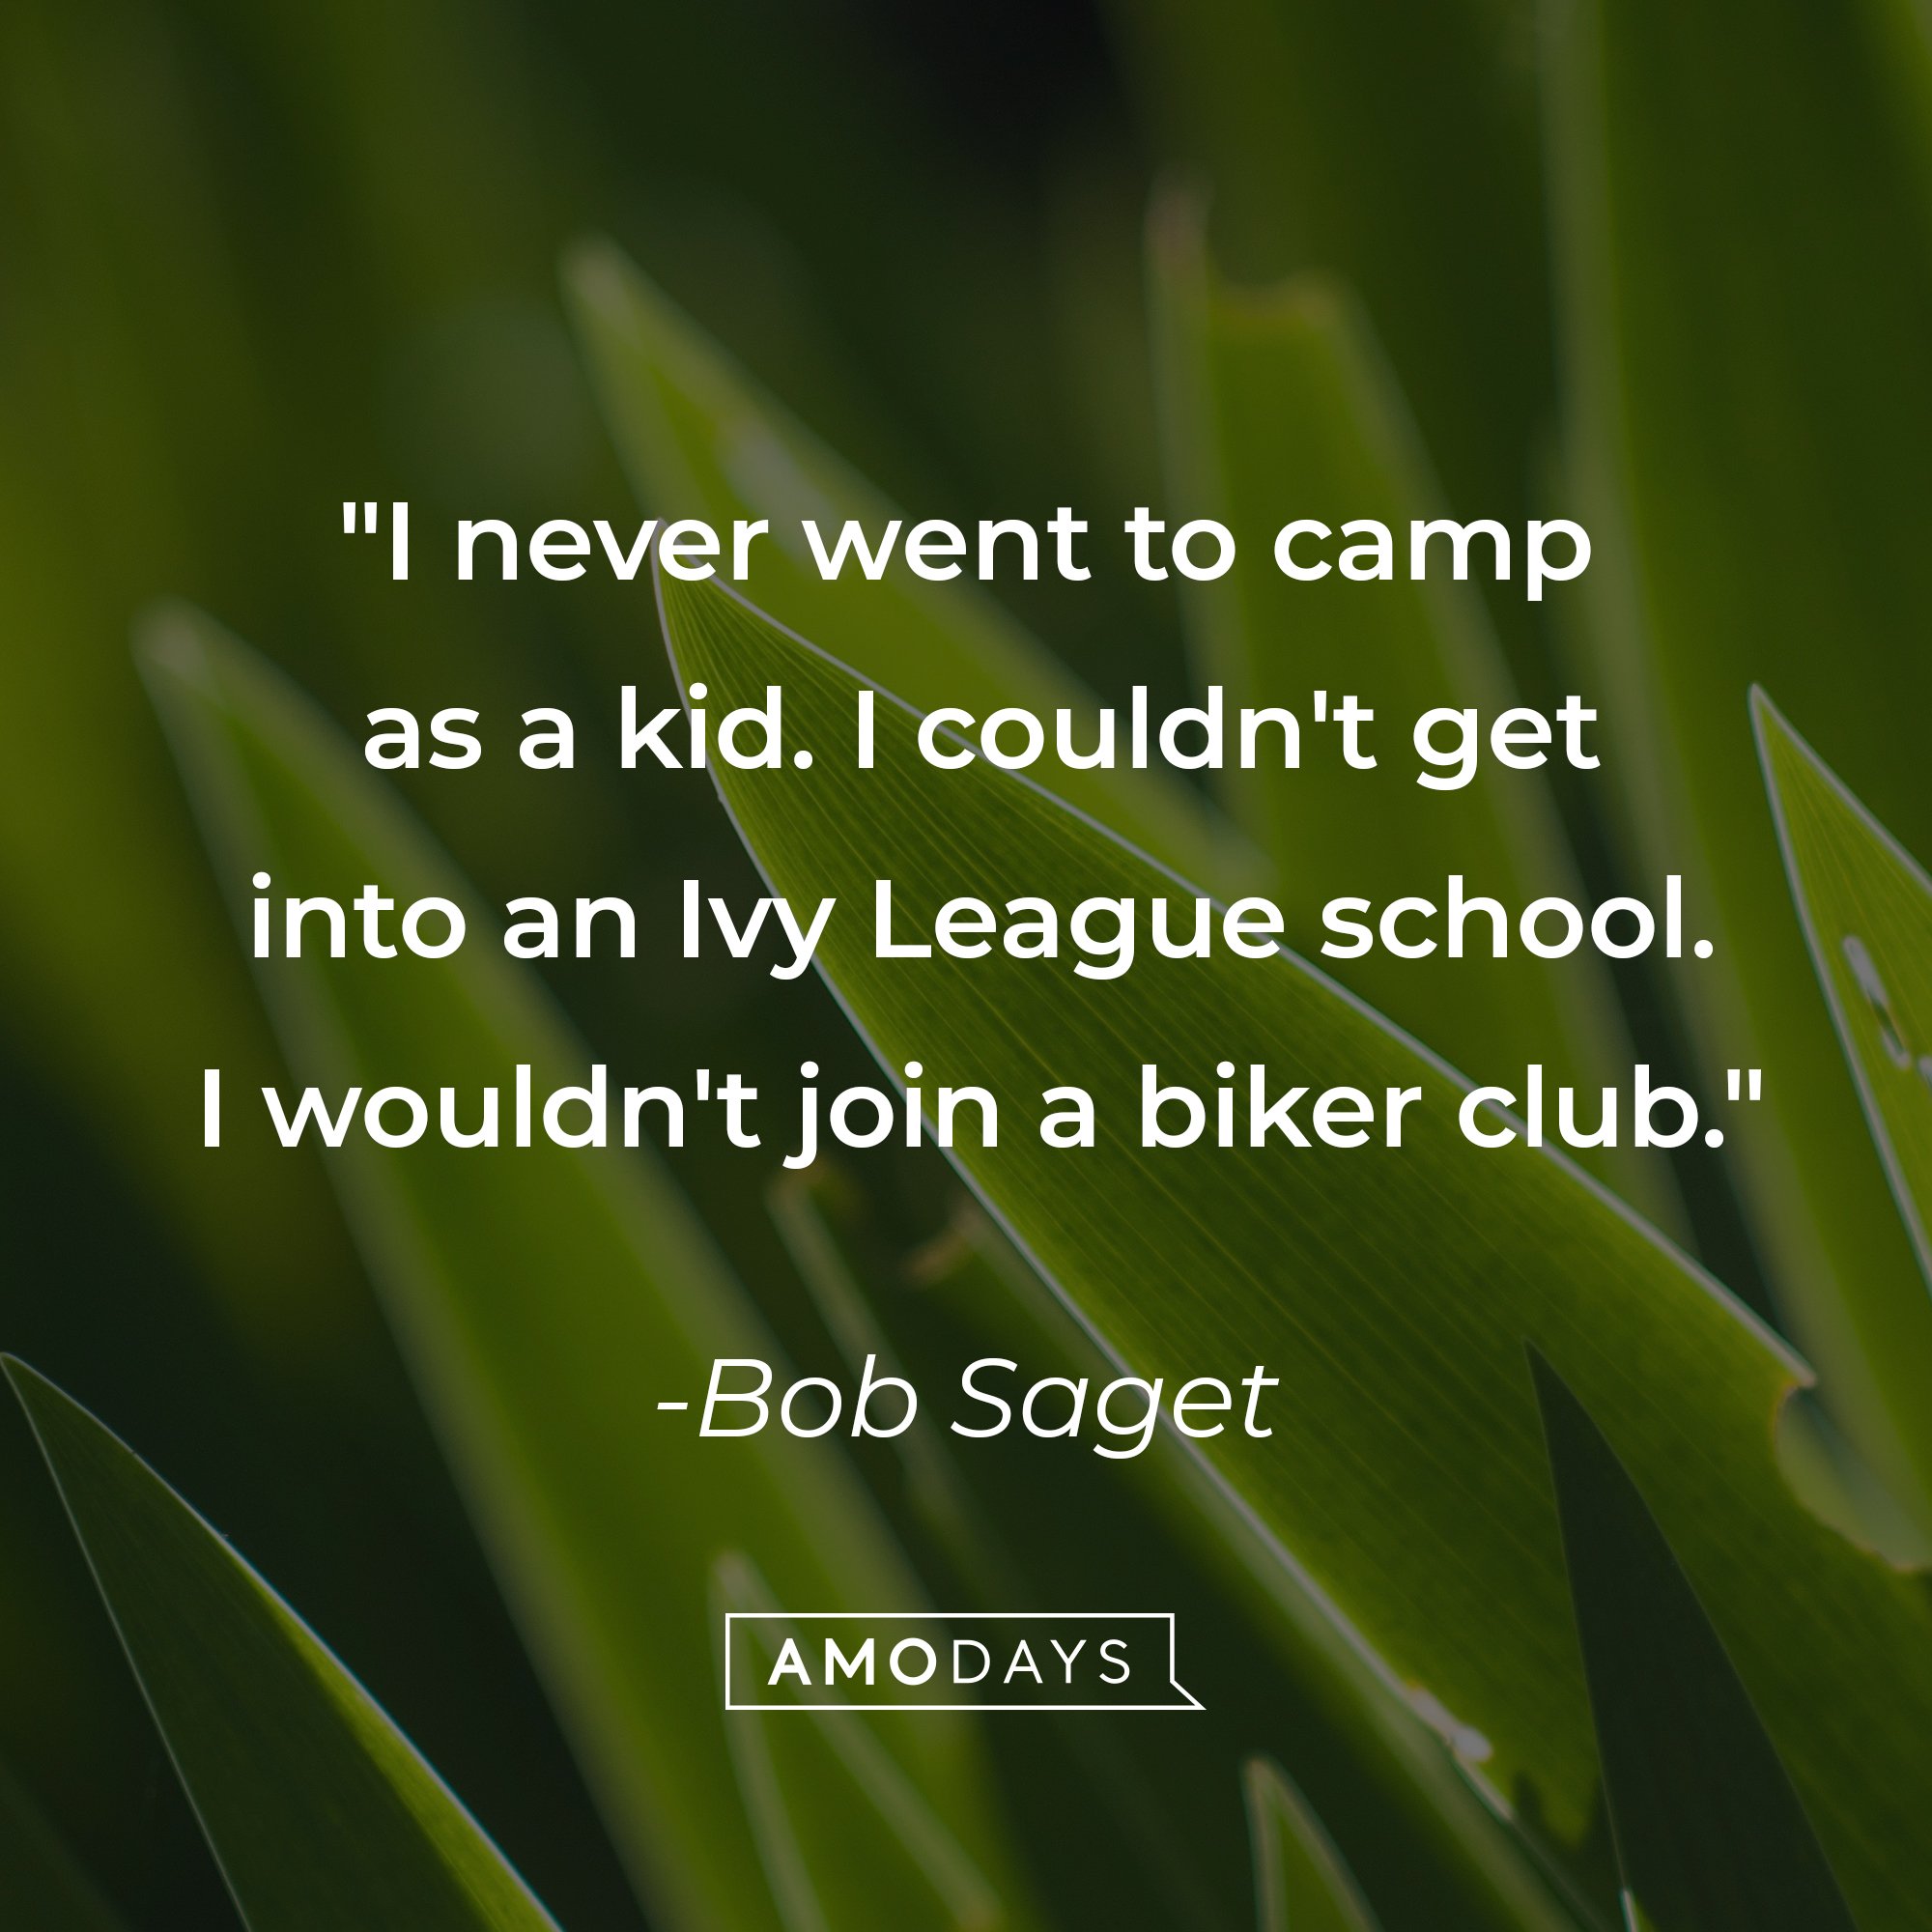  Bob Saget’s quote: "I never went to camp as a kid. I couldn't get into an Ivy League school. I wouldn't join a biker club." | Image: AmoDays